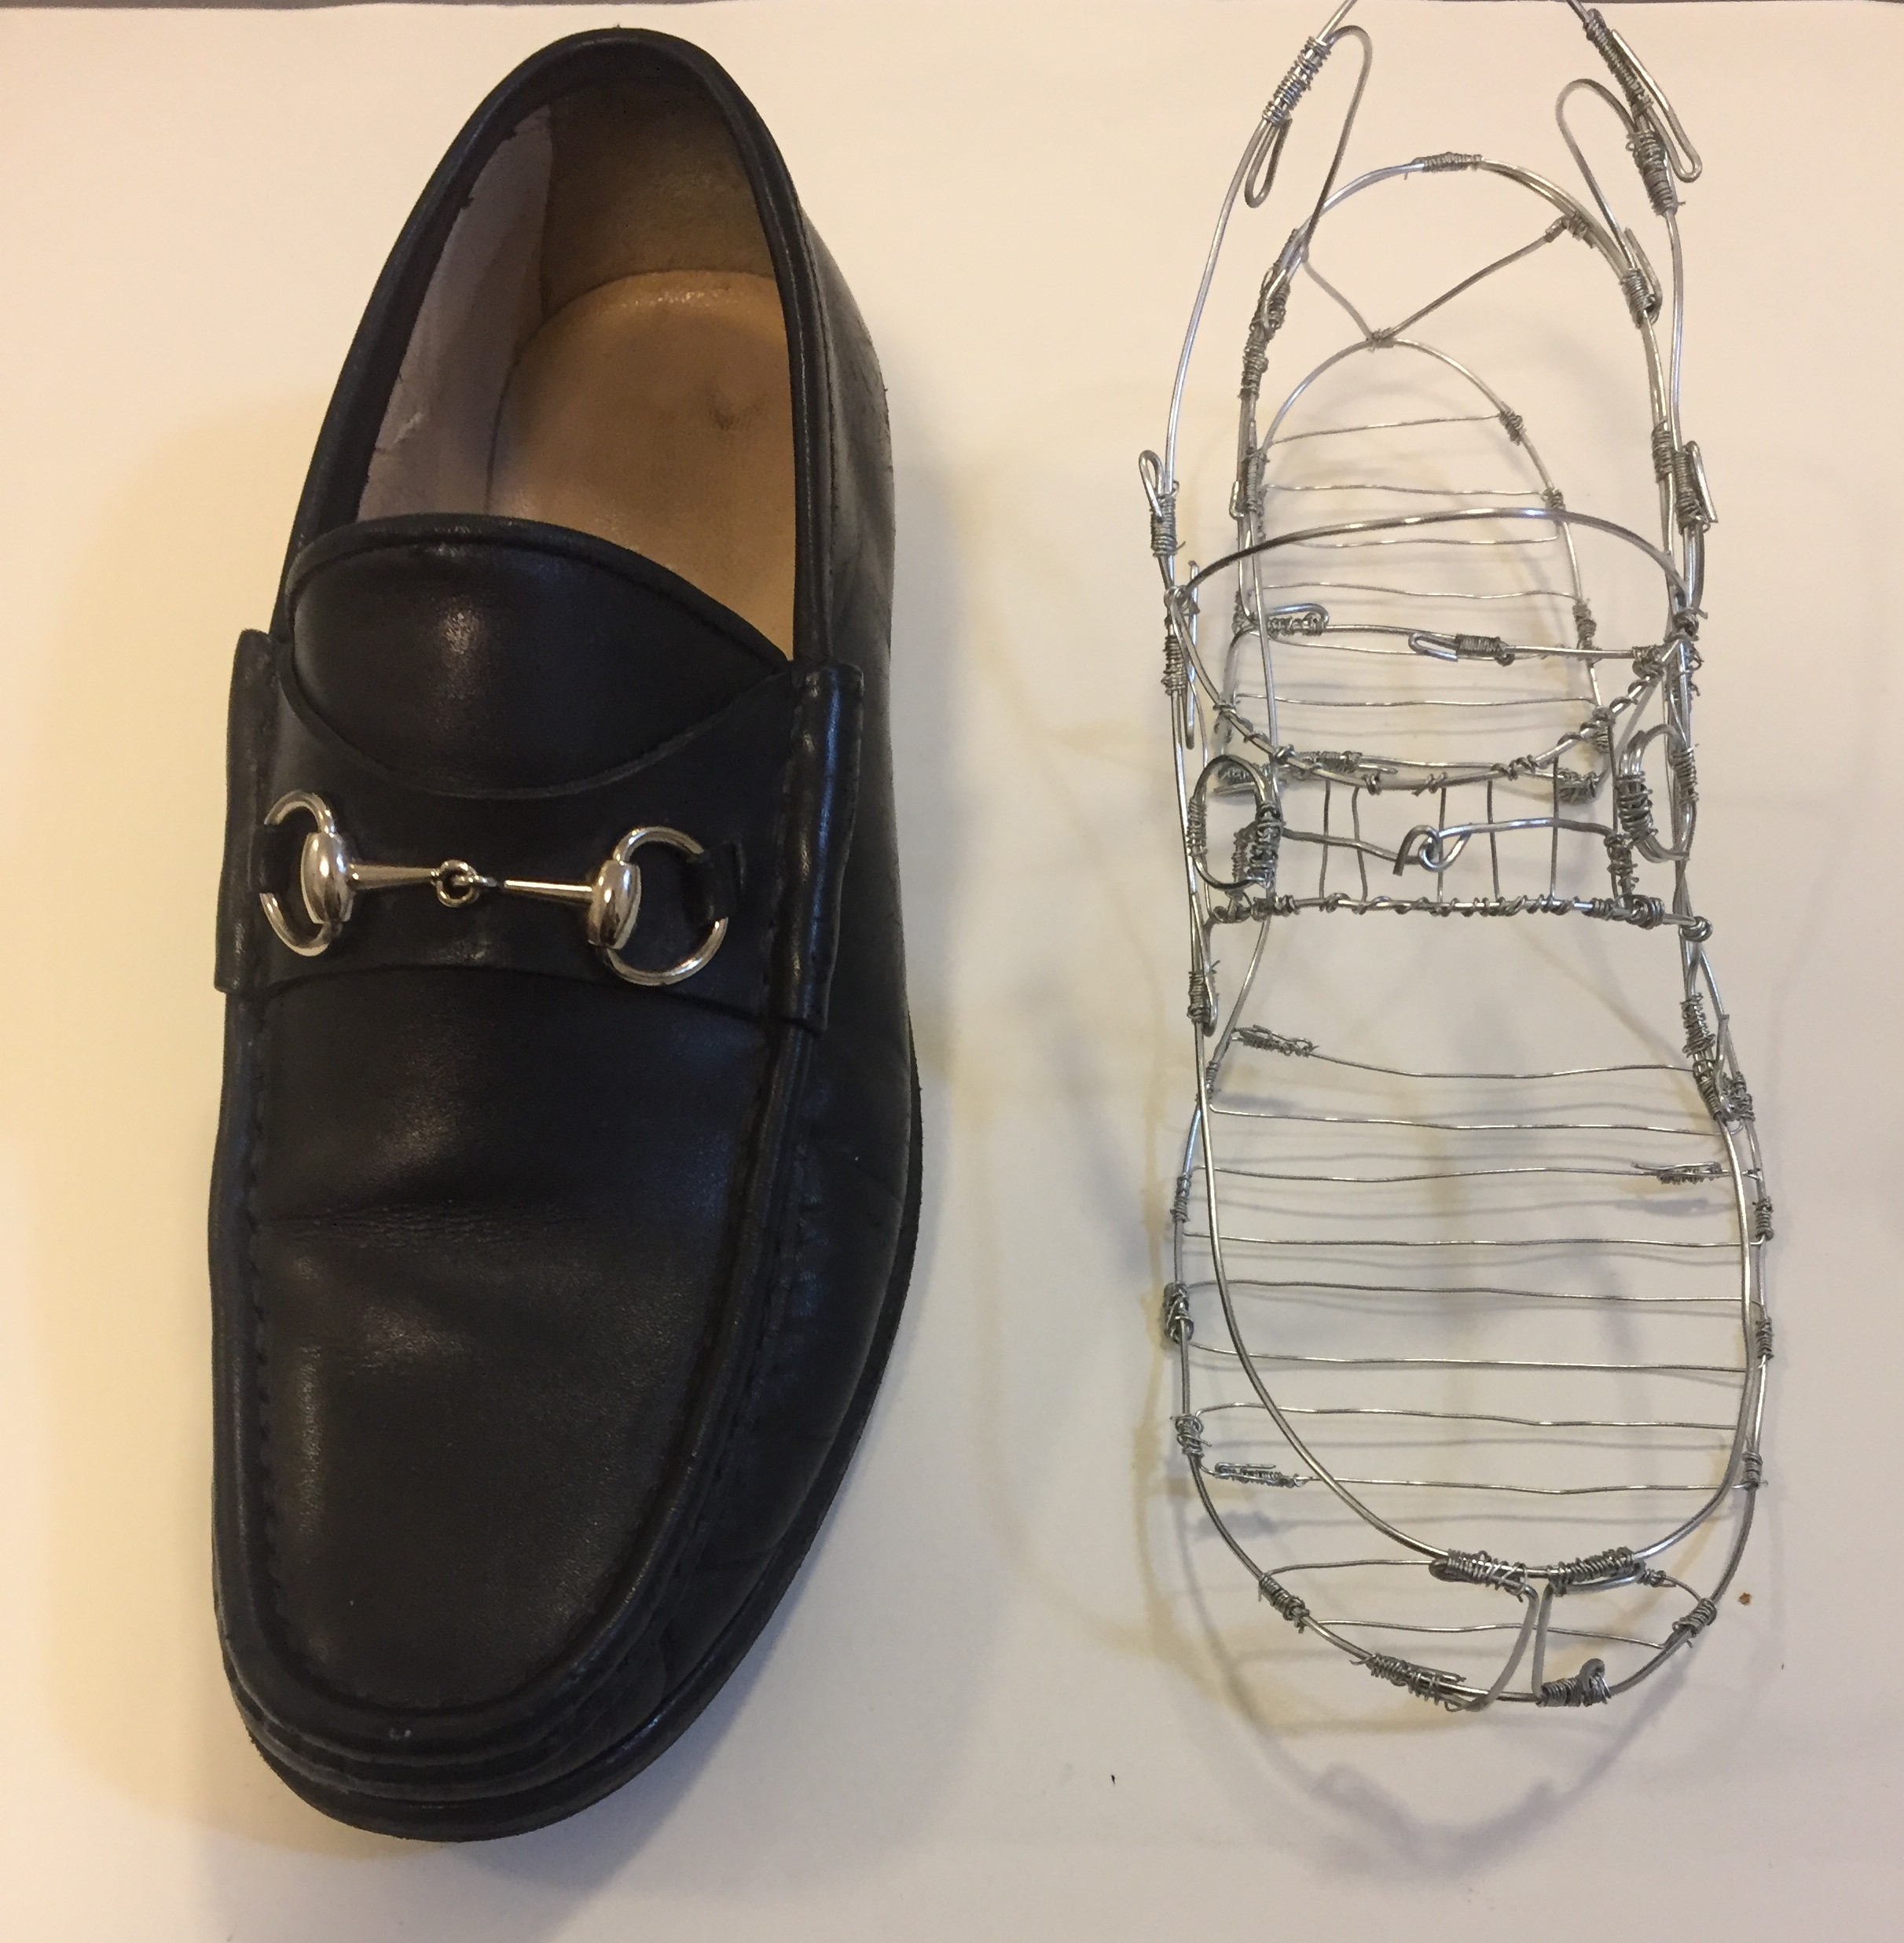 Space + Materiality: Wire Shoe Project